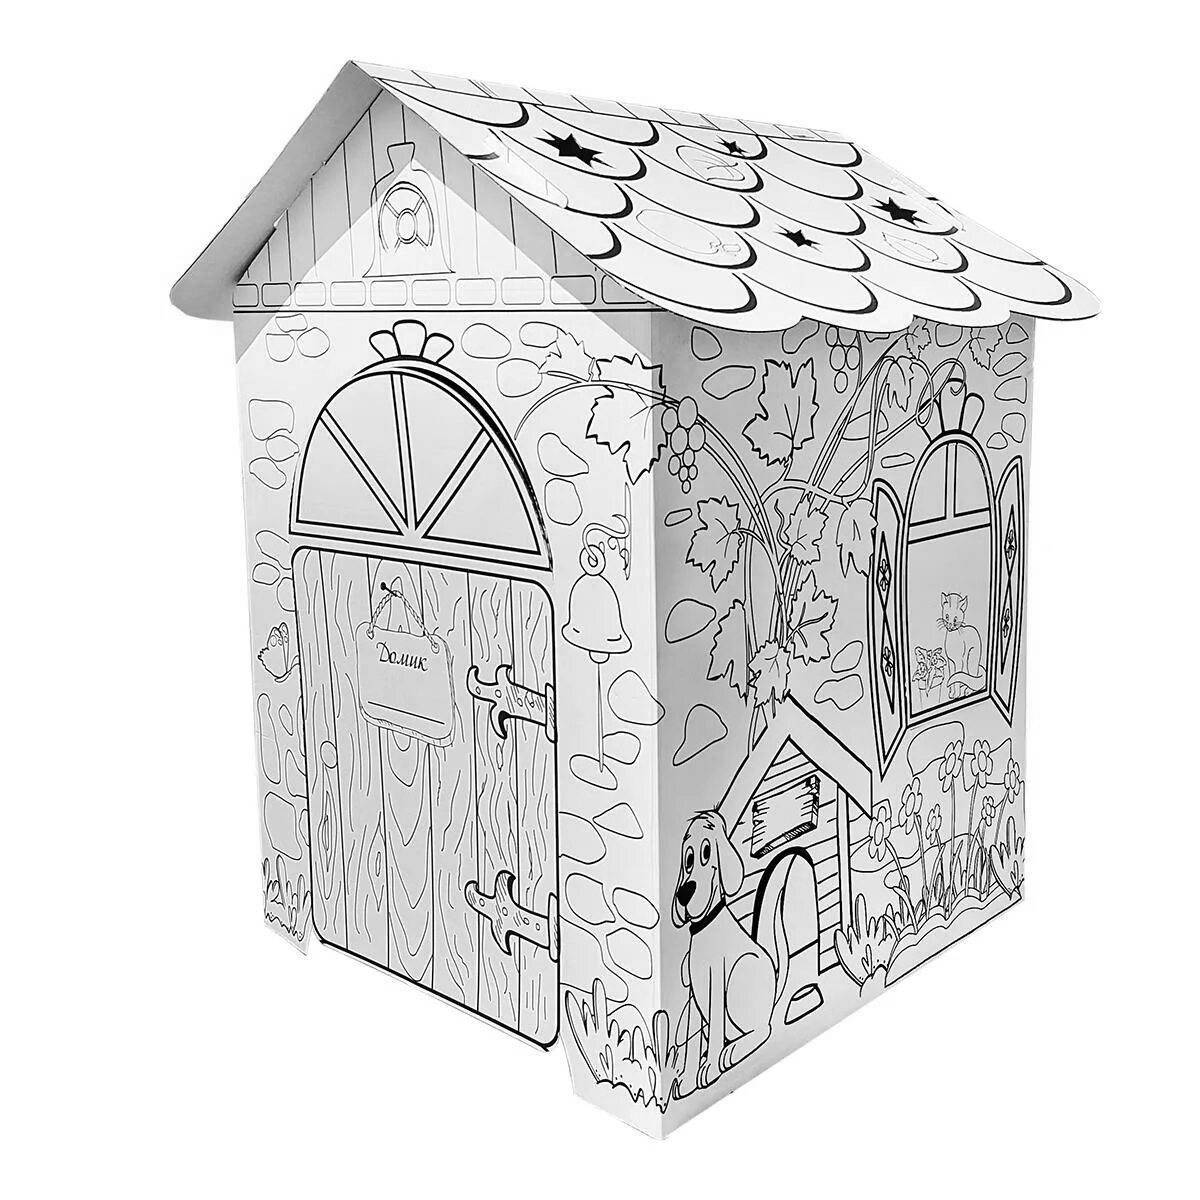 A fun cardboard house coloring page